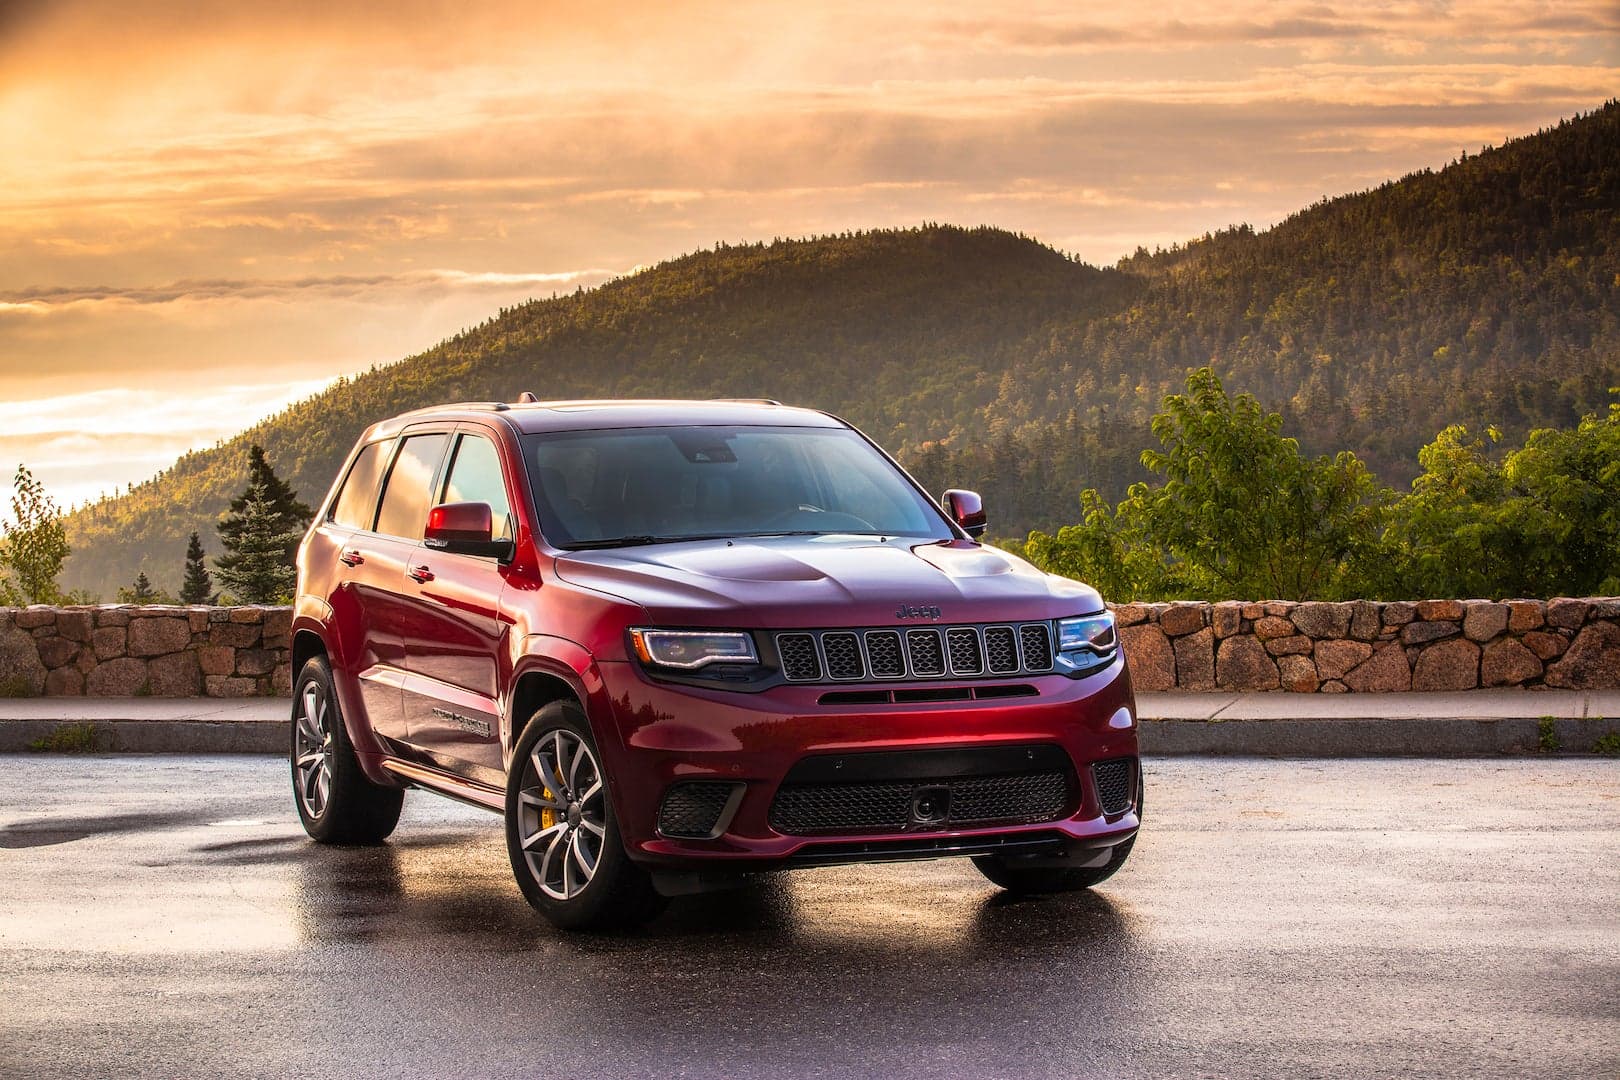 FCA to Revive Idled Detroit Factory to Build Three-Row Jeep Grand Cherokee: Report